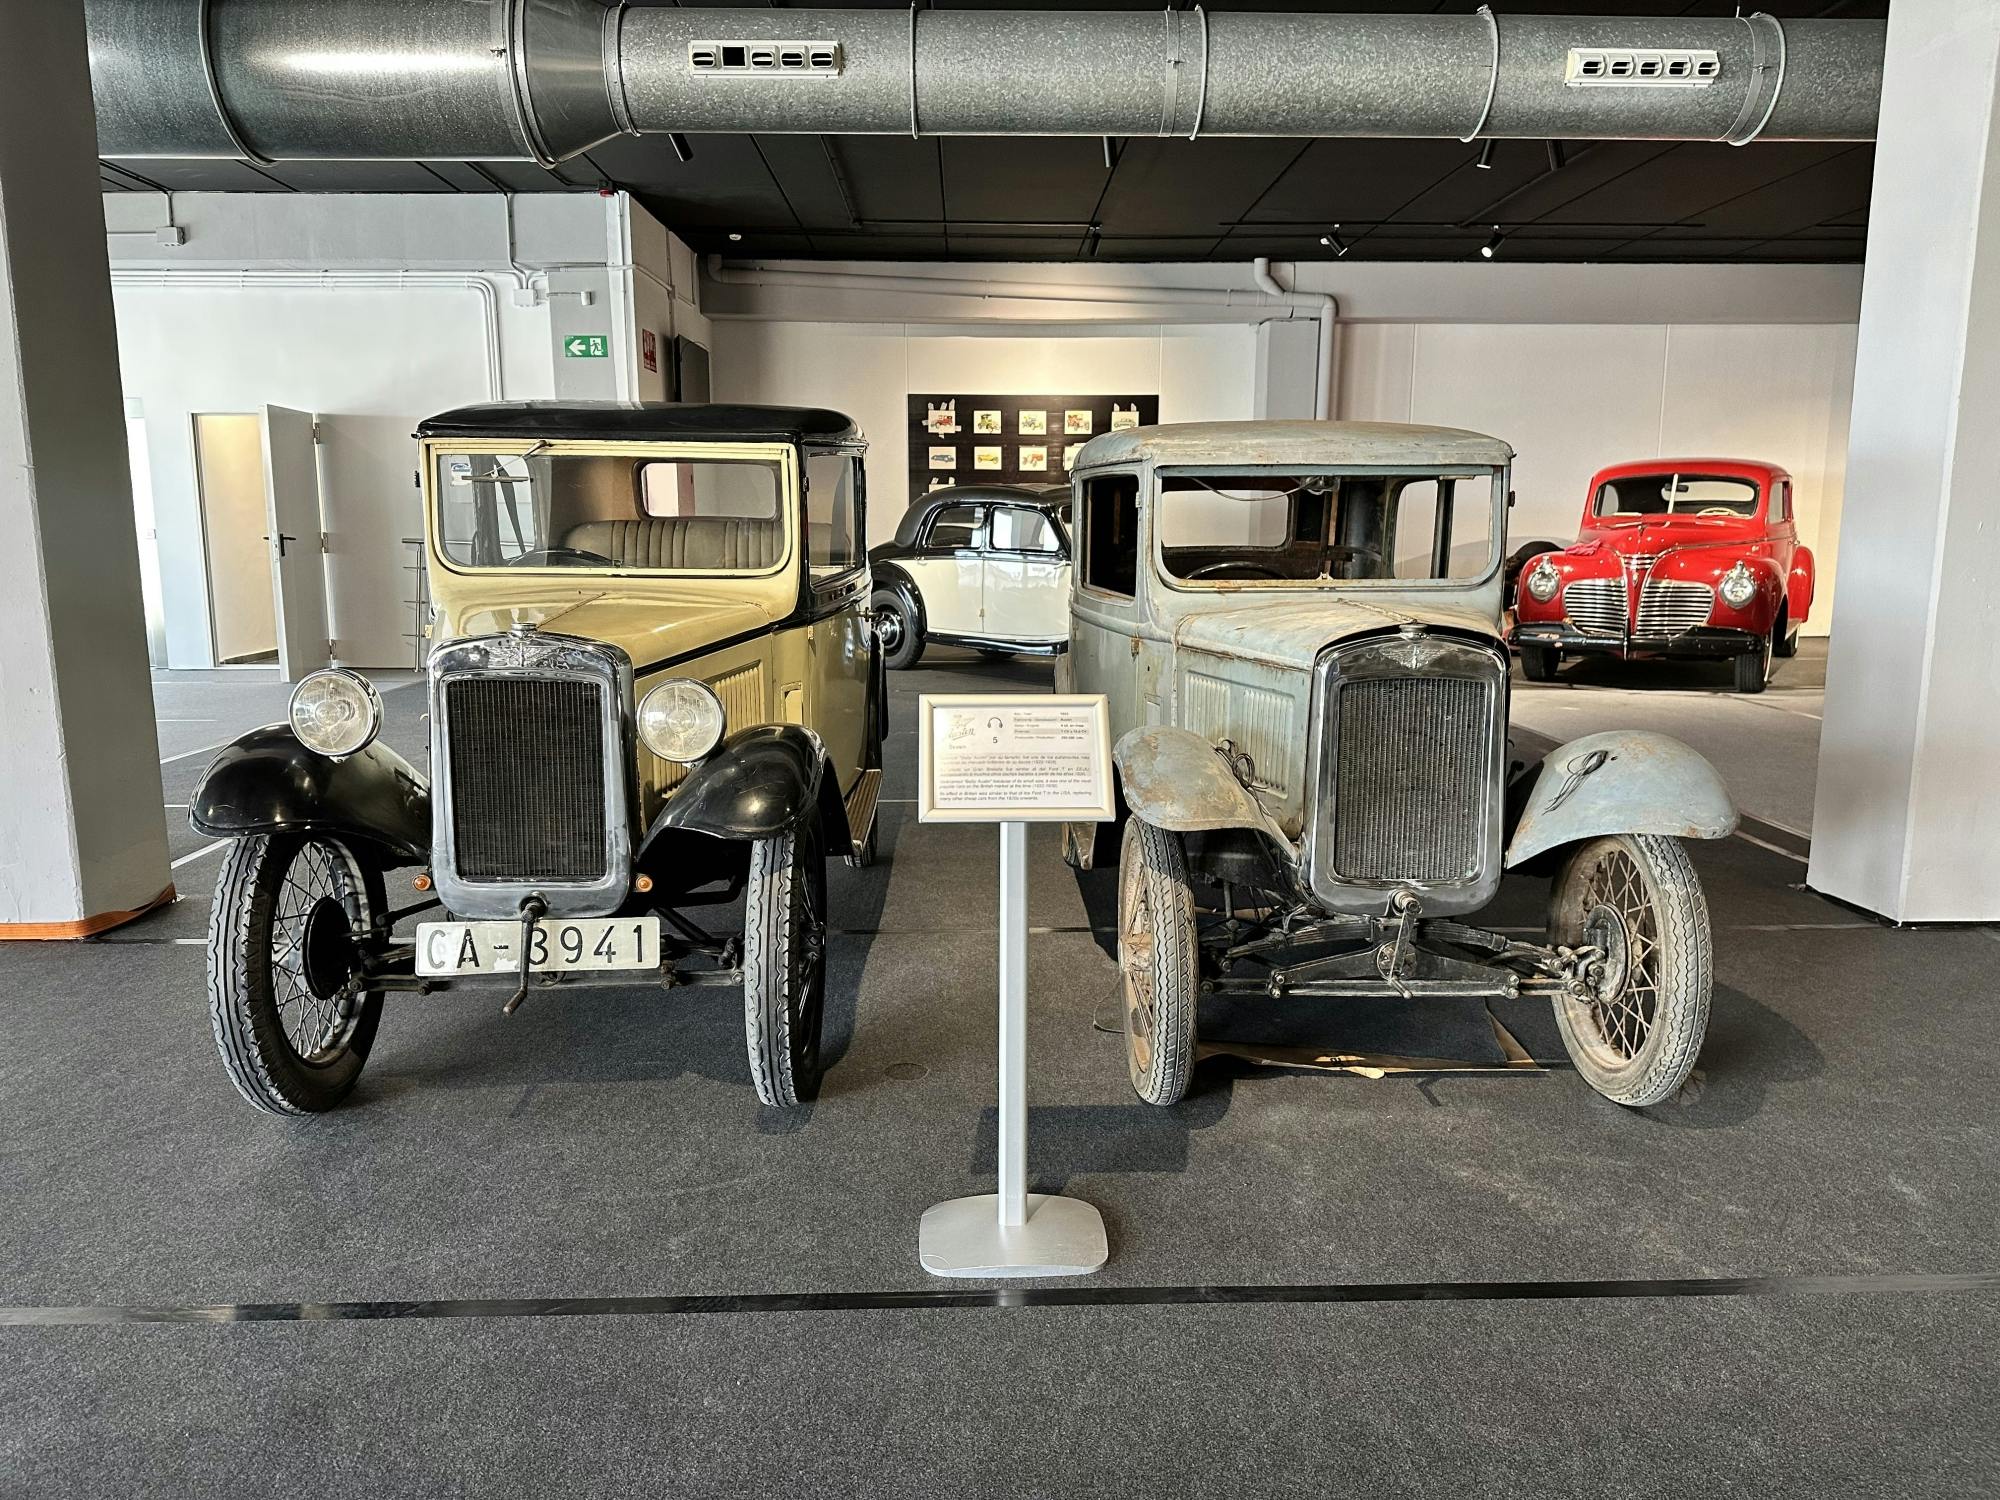 Entrance tickets for the Motor Museum in Finestrat